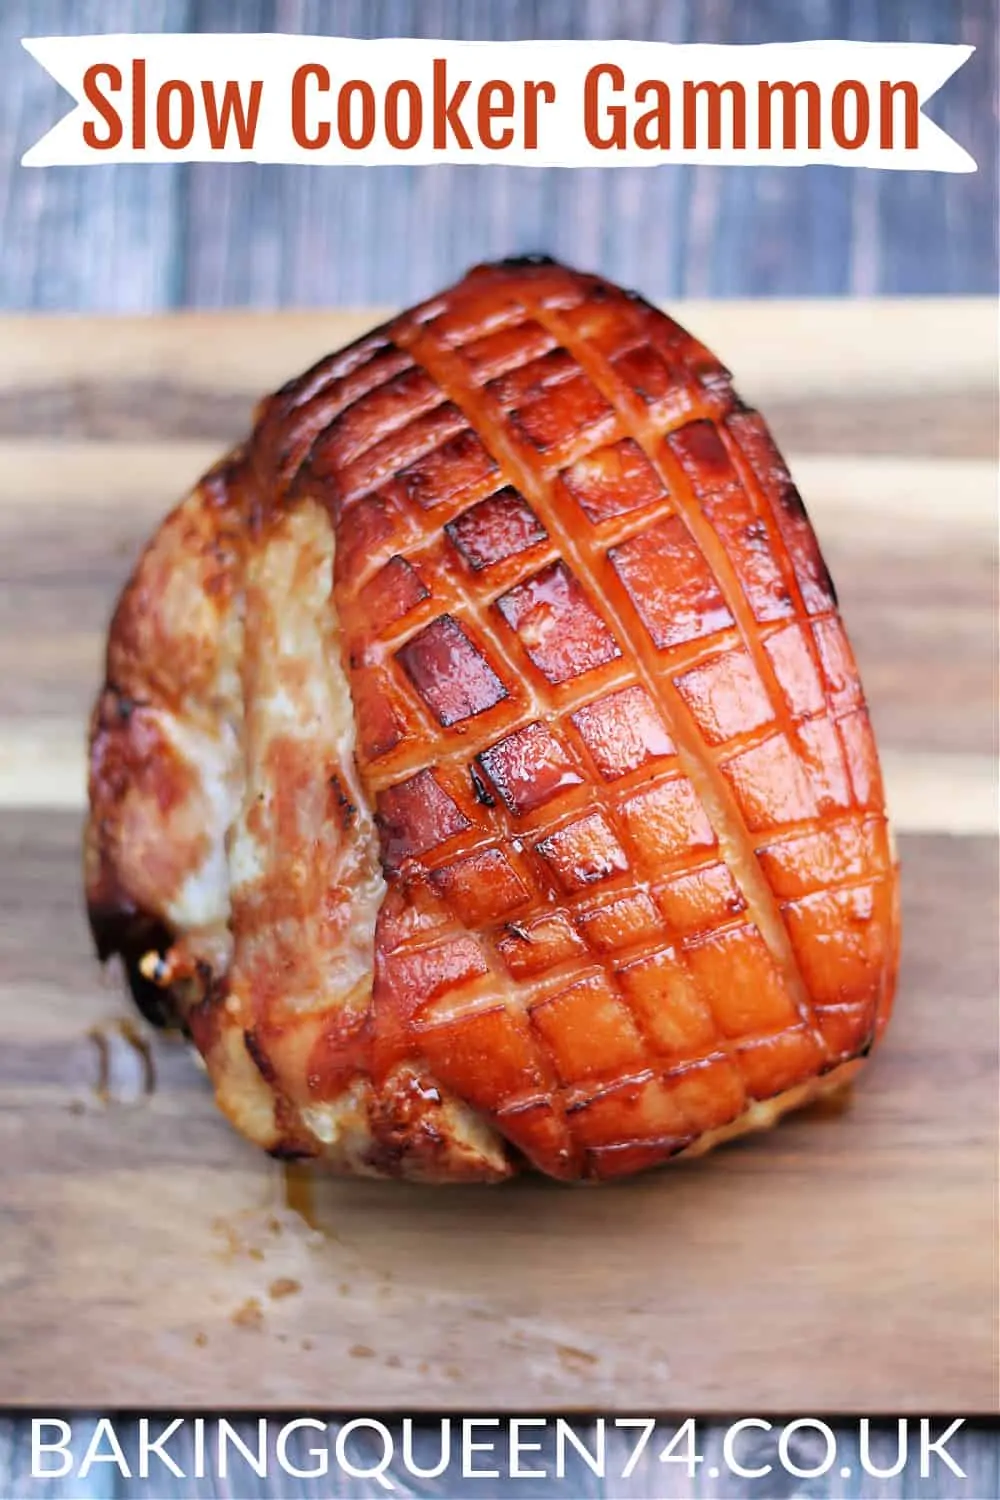 Slow cooker gammon image with text overlay